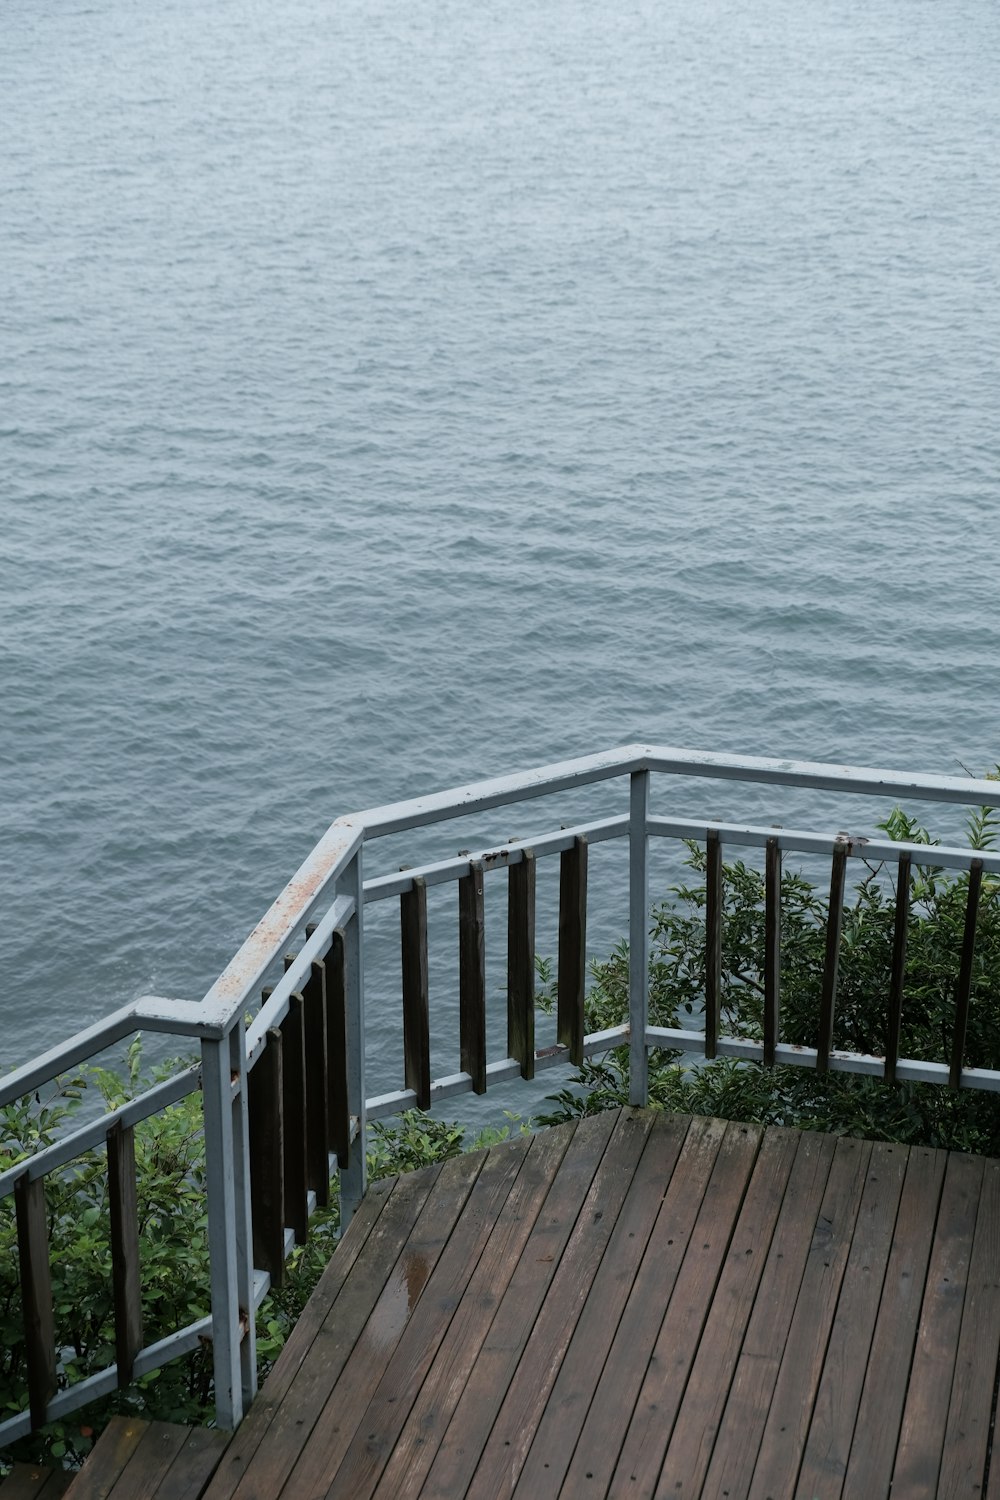 a wooden deck overlooking a body of water